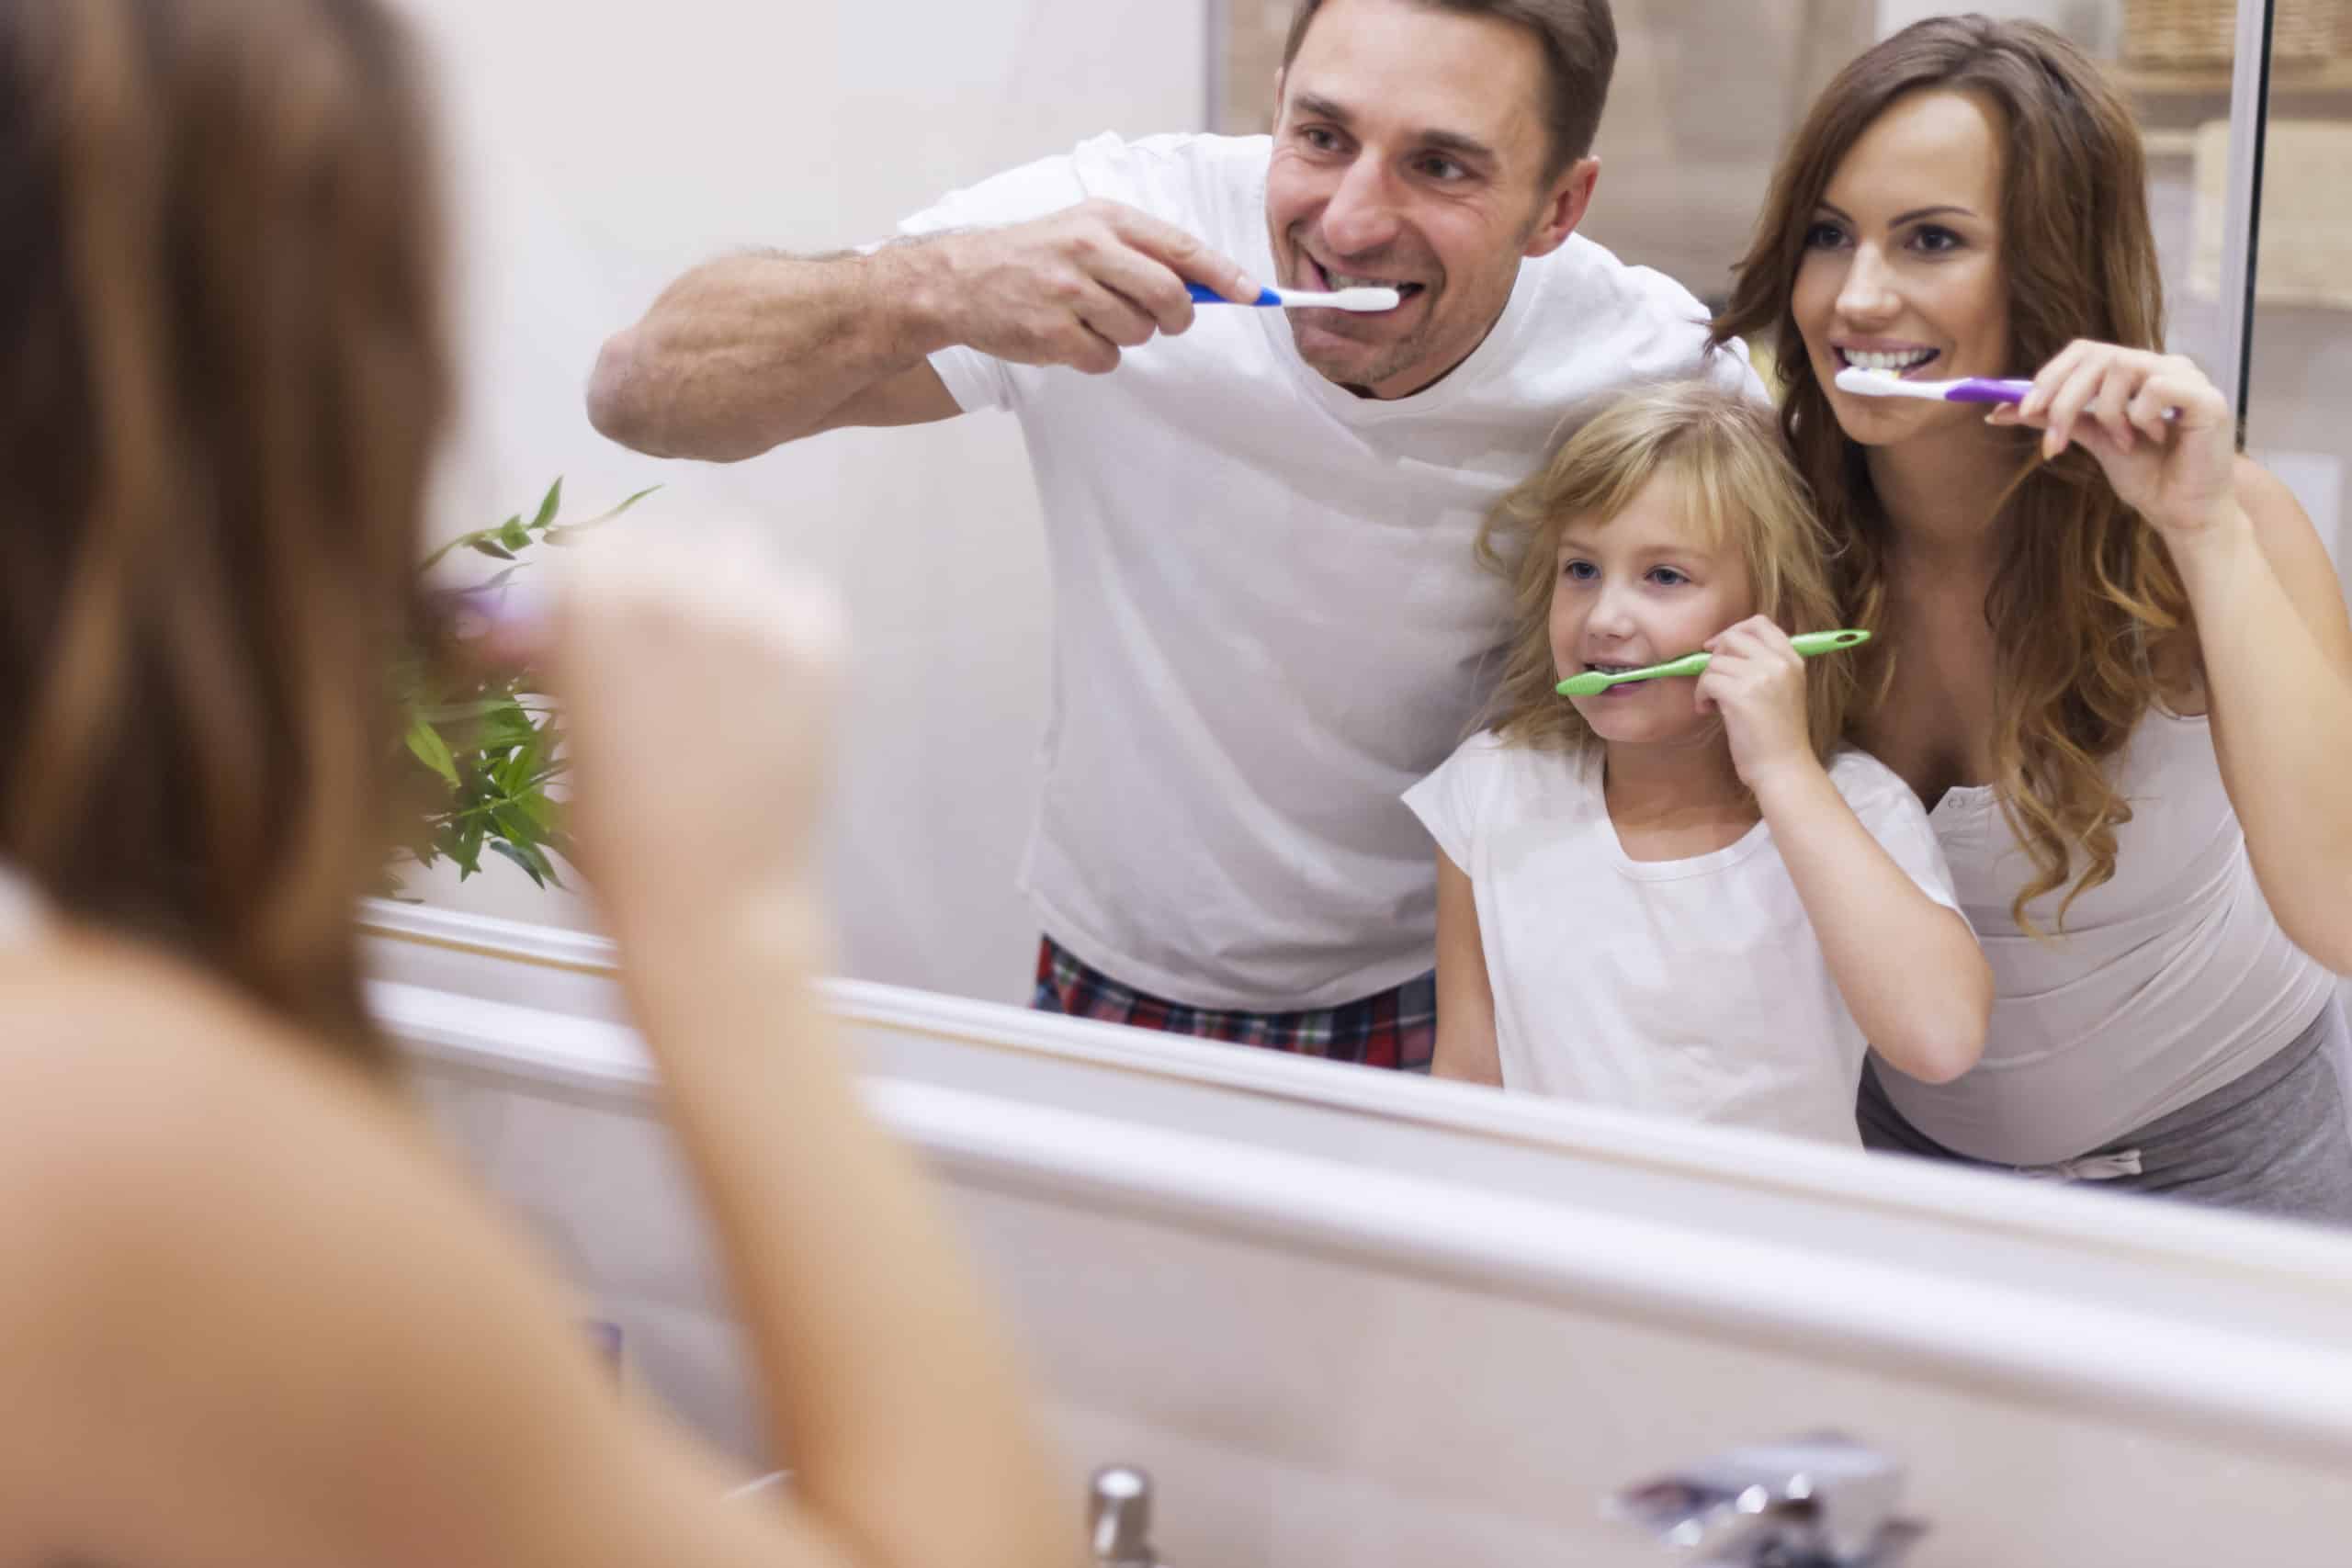 Are you brushing your teeth properly?